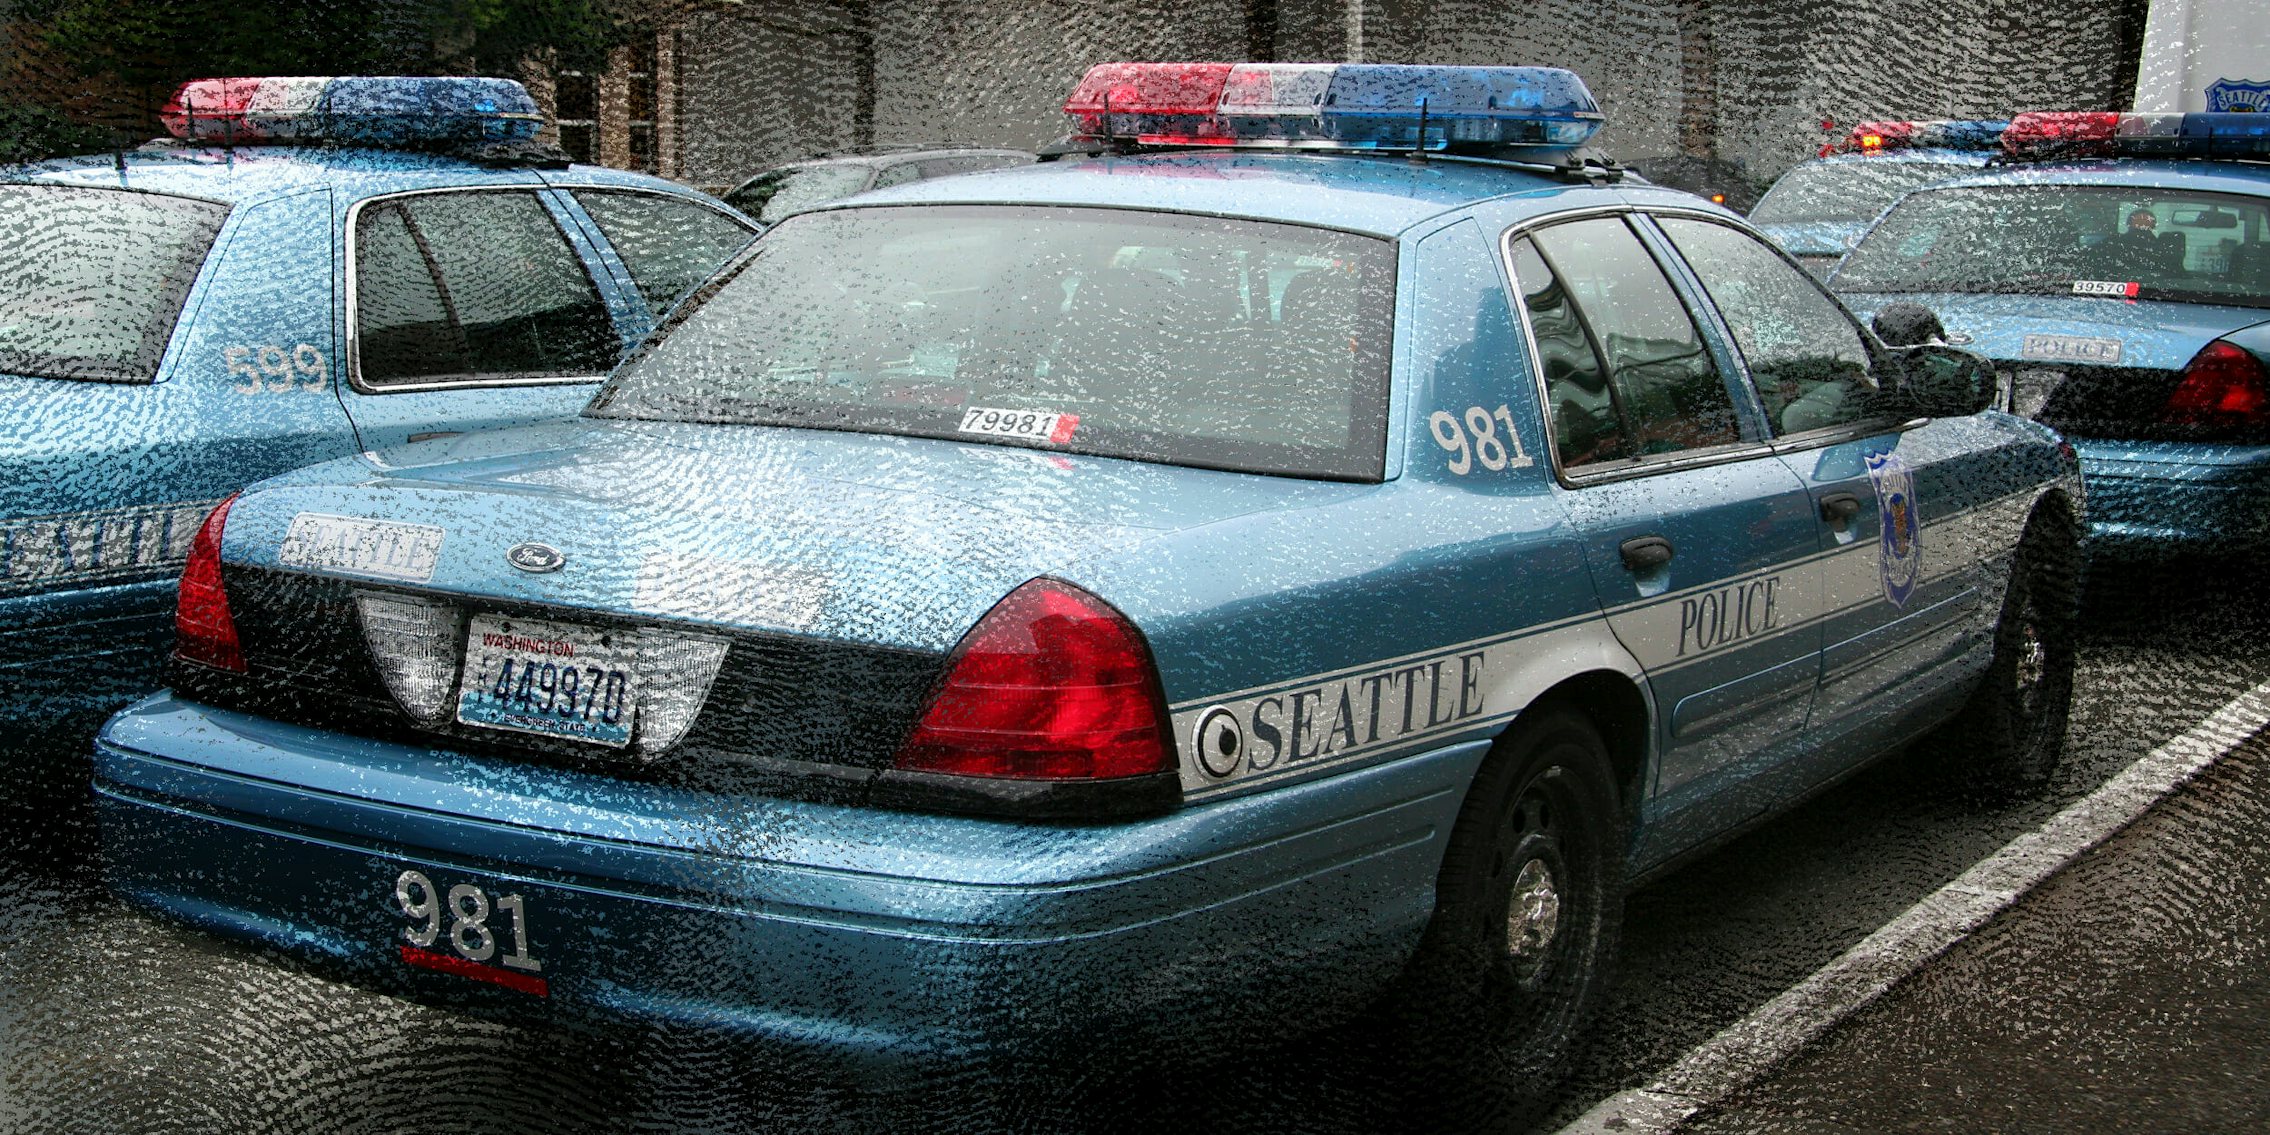 Seattle Police cars